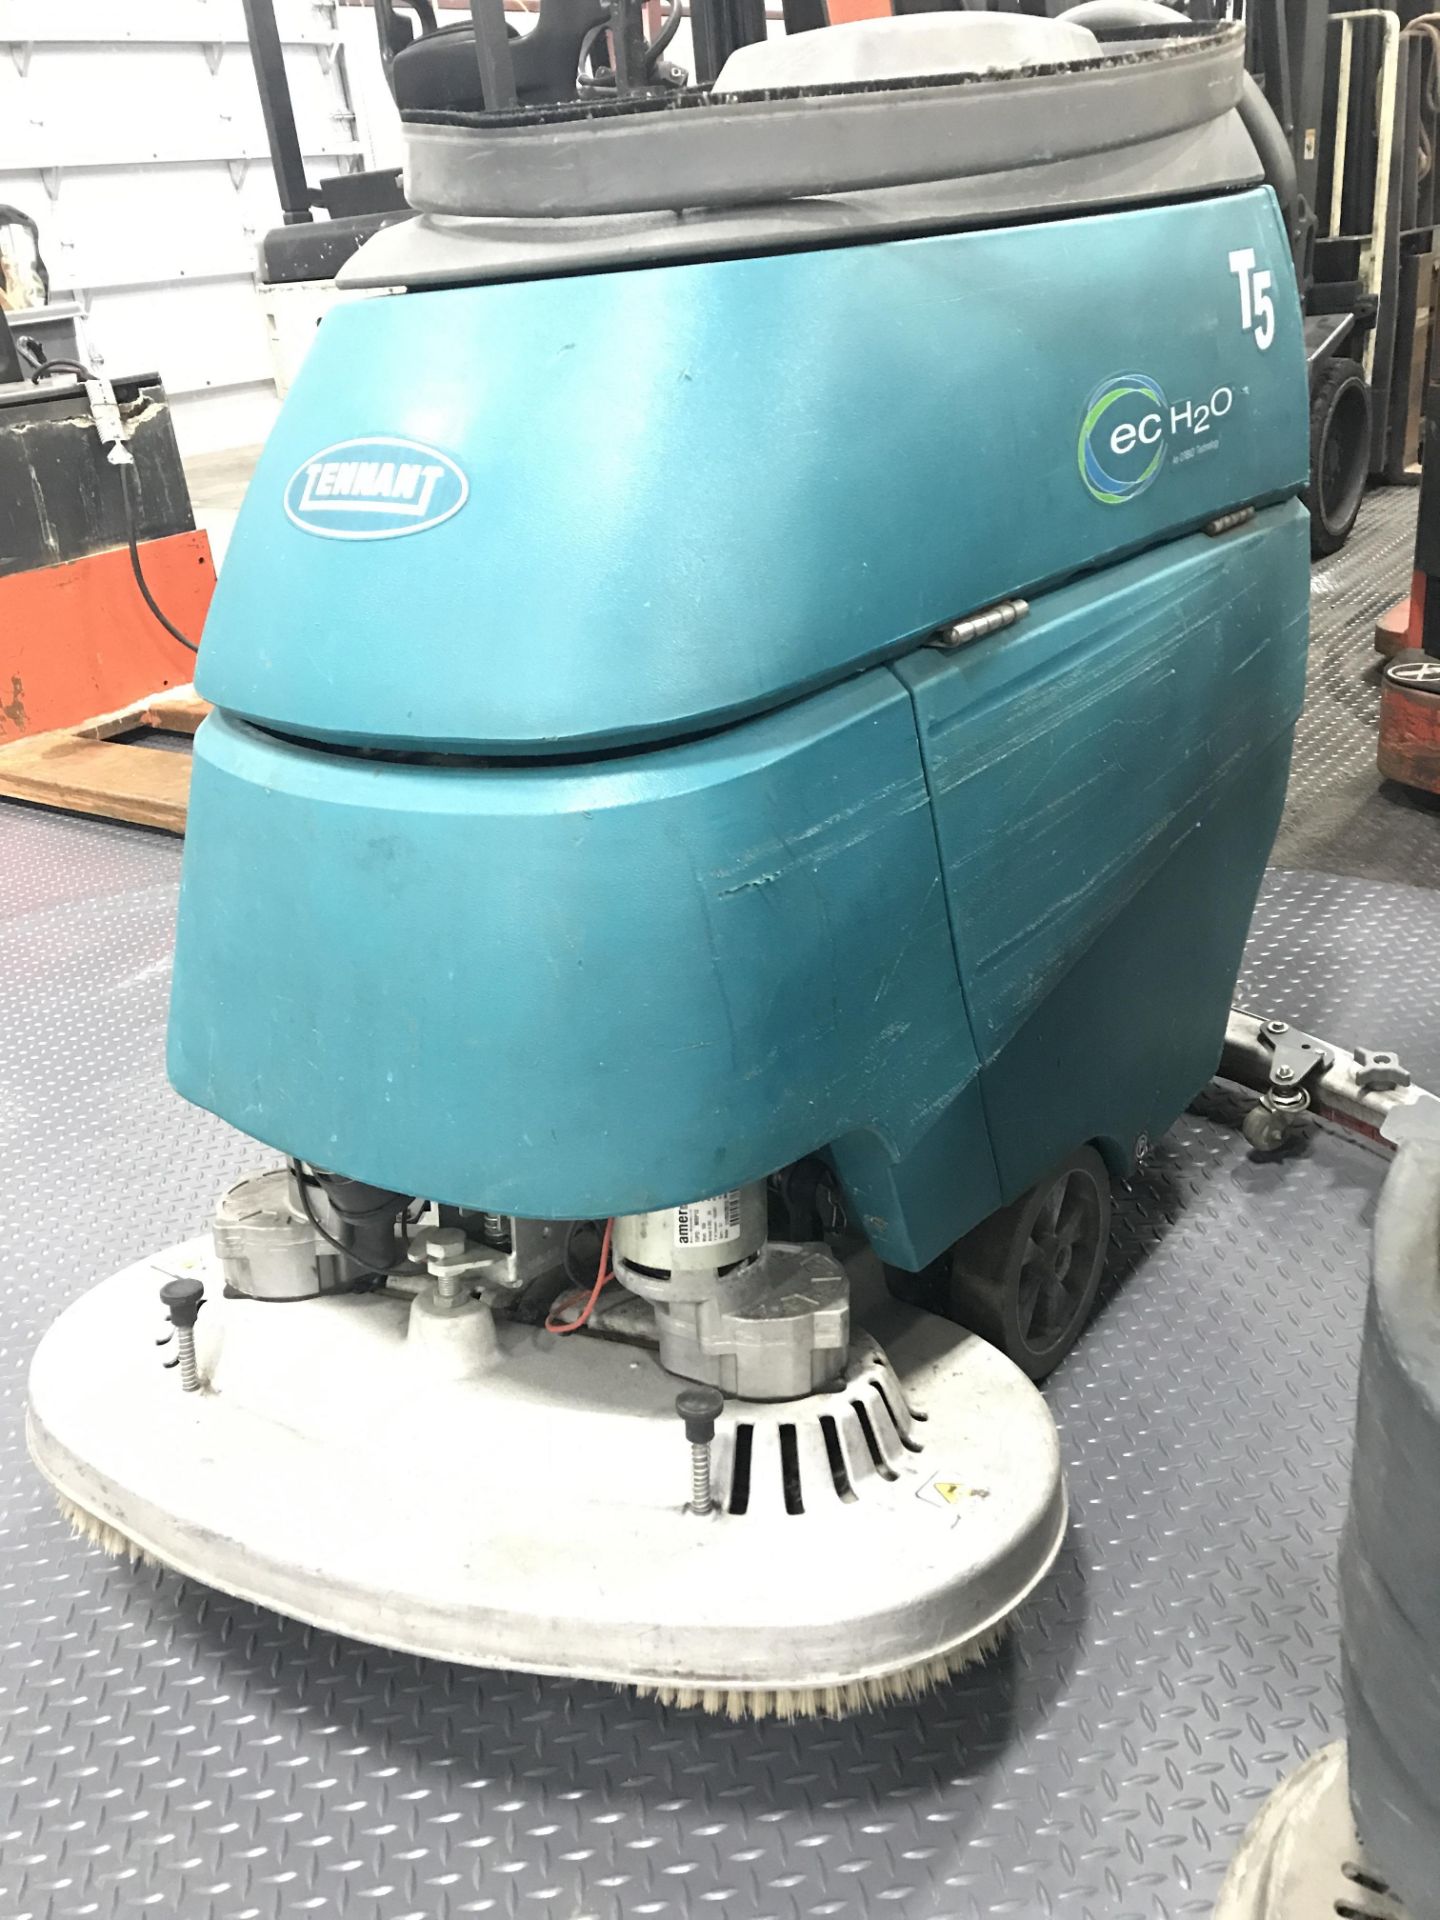 TENNANT T5 FLOOR SWEEPER/SCRUBBER, ECO H20, 780 HOURS SHOWING. - Image 2 of 8